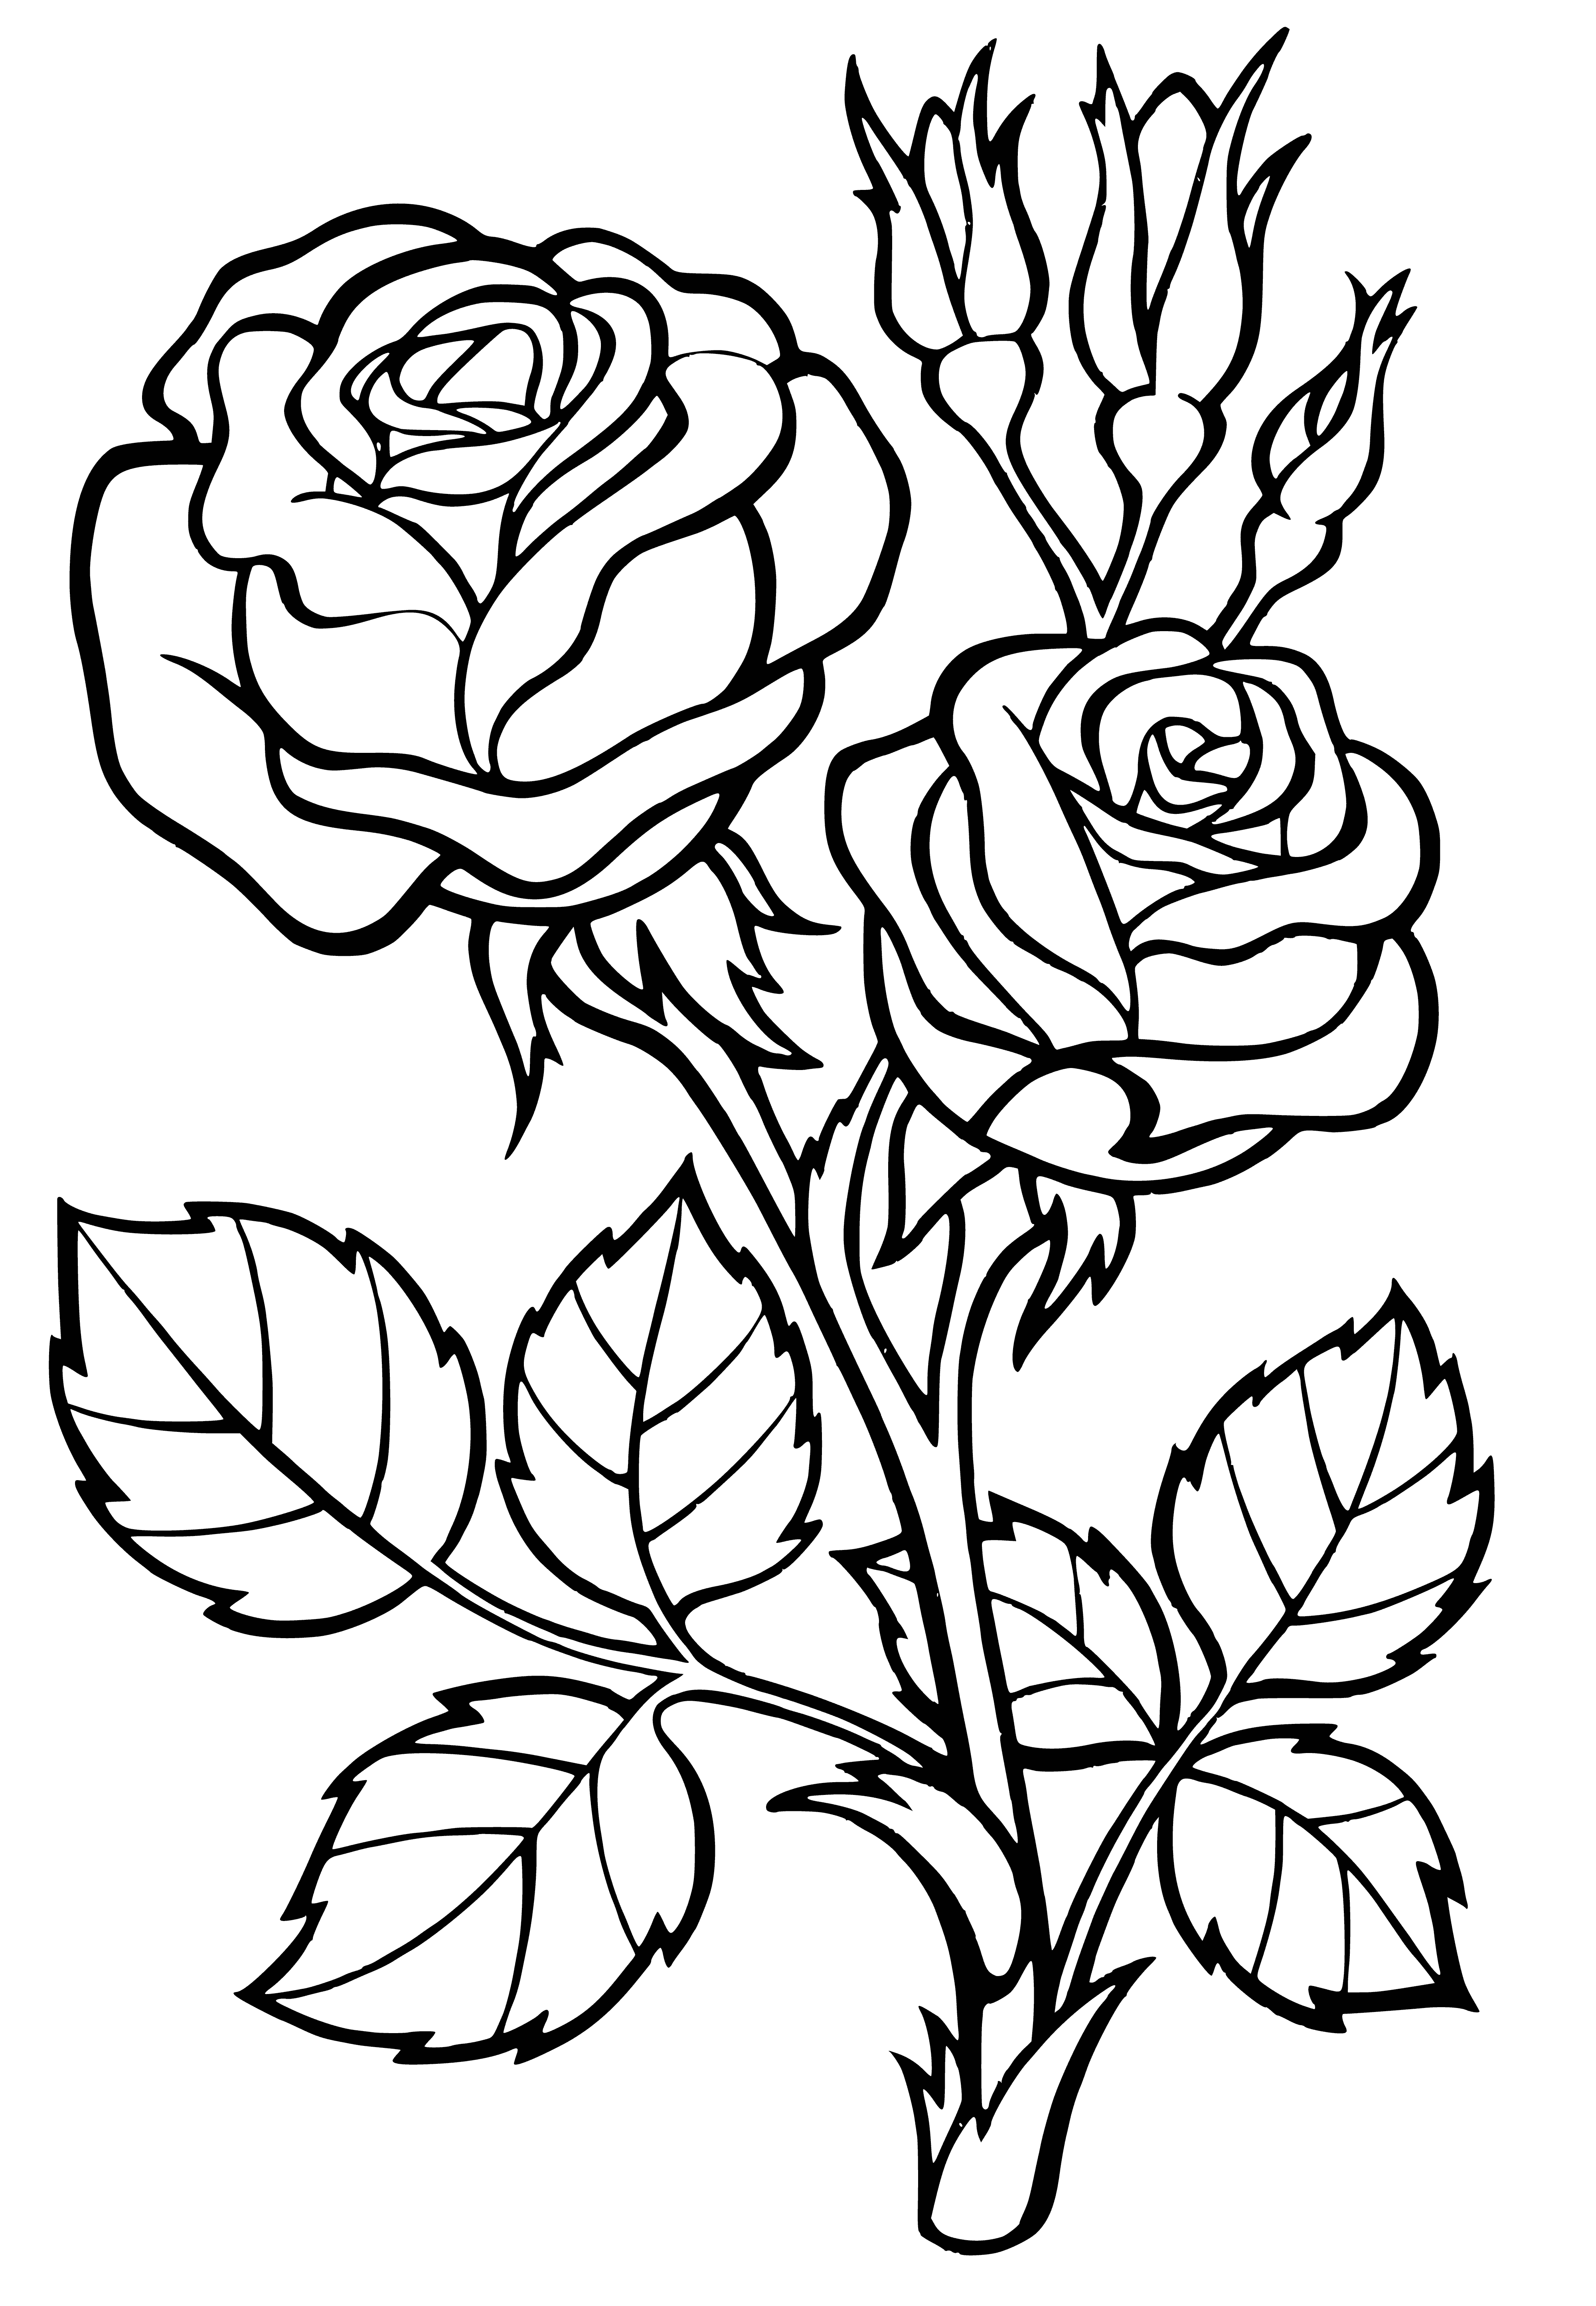 the Rose coloring page